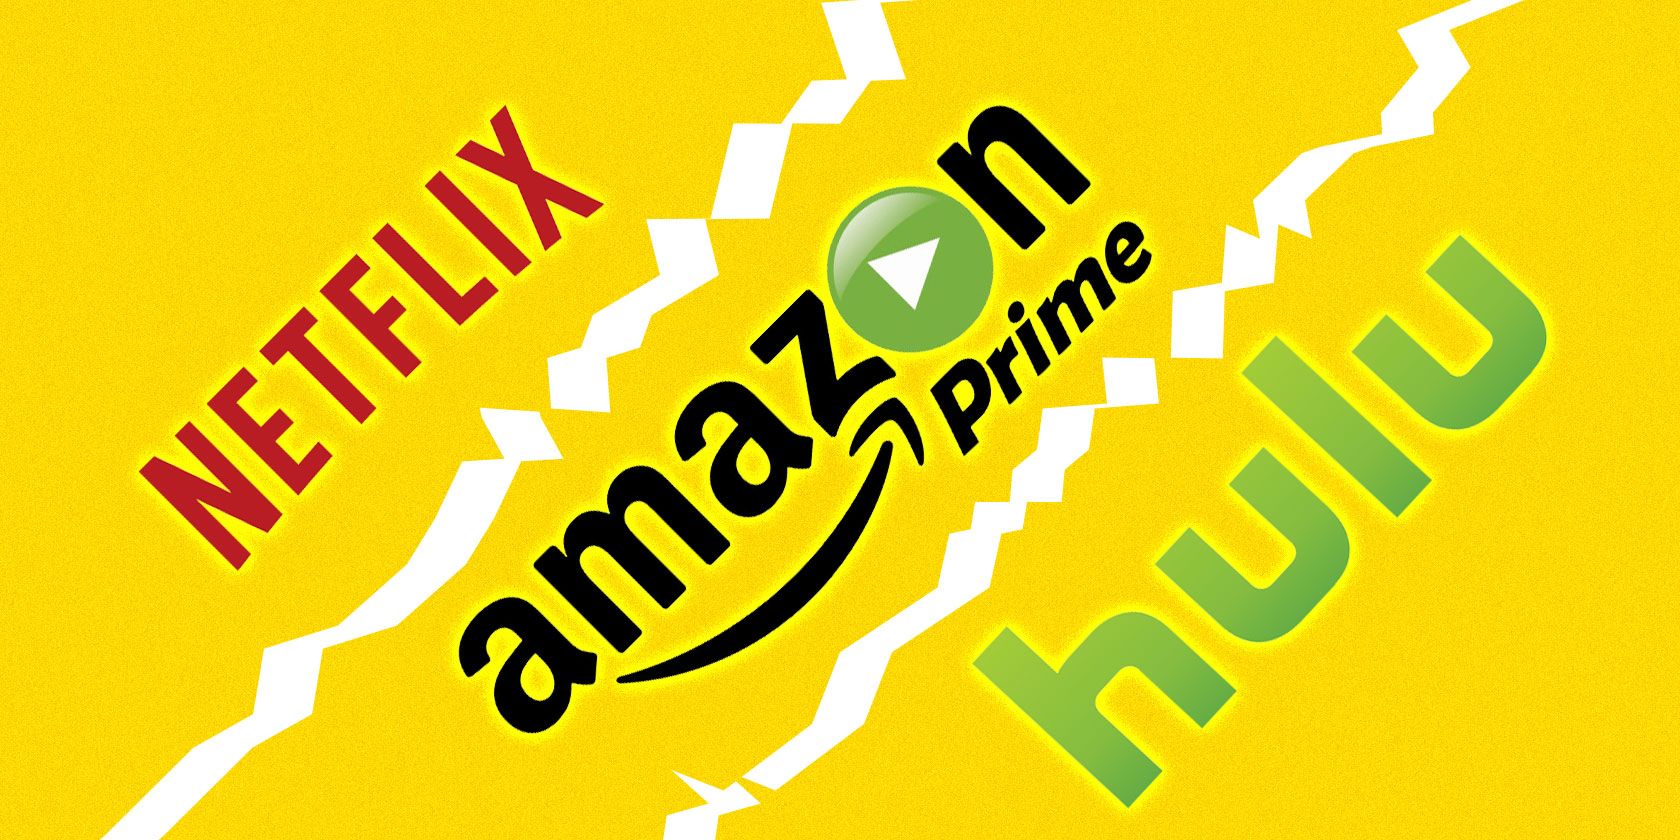 Netflix Vs Hulu Vs Amazon Prime Video The Best Streaming Service For You